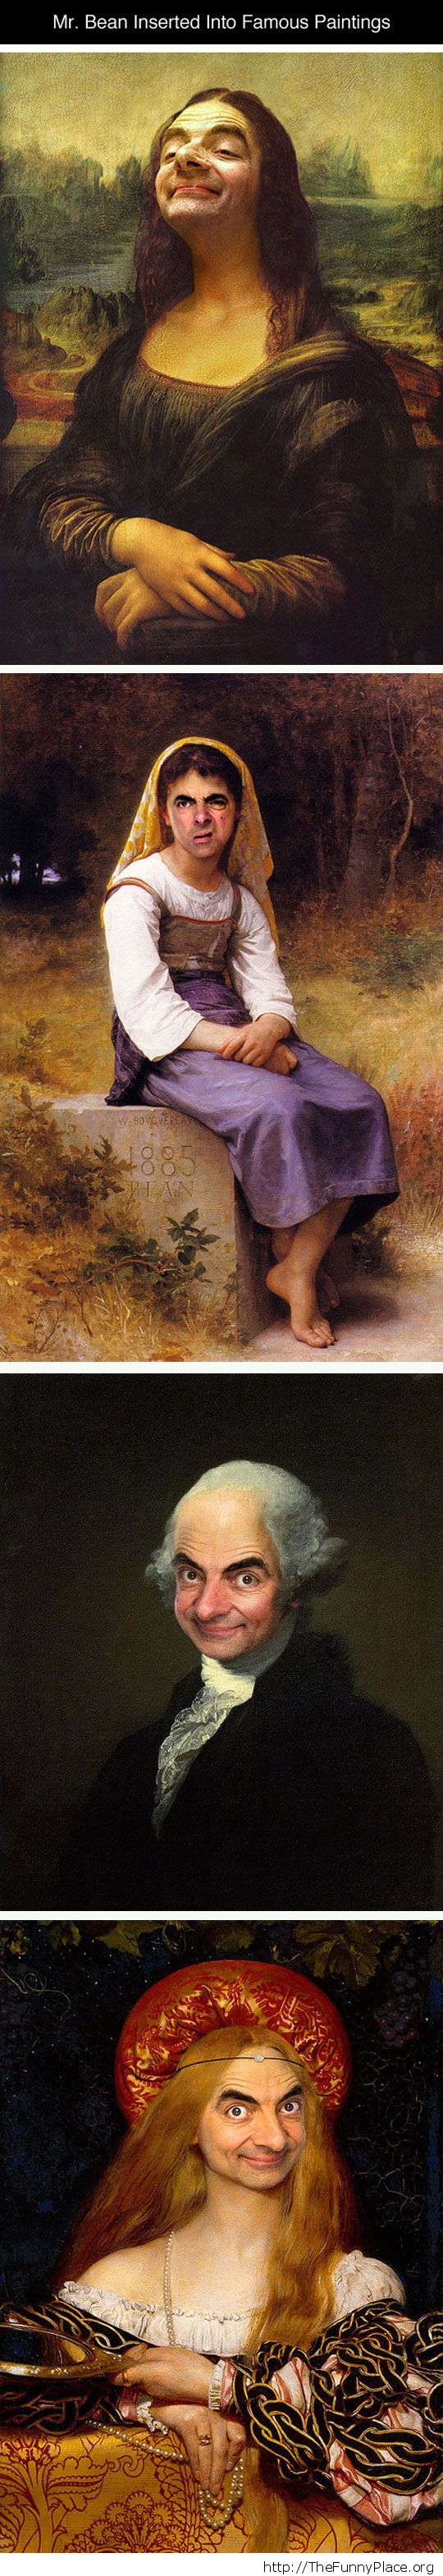 Mr Bean In Famous Painting